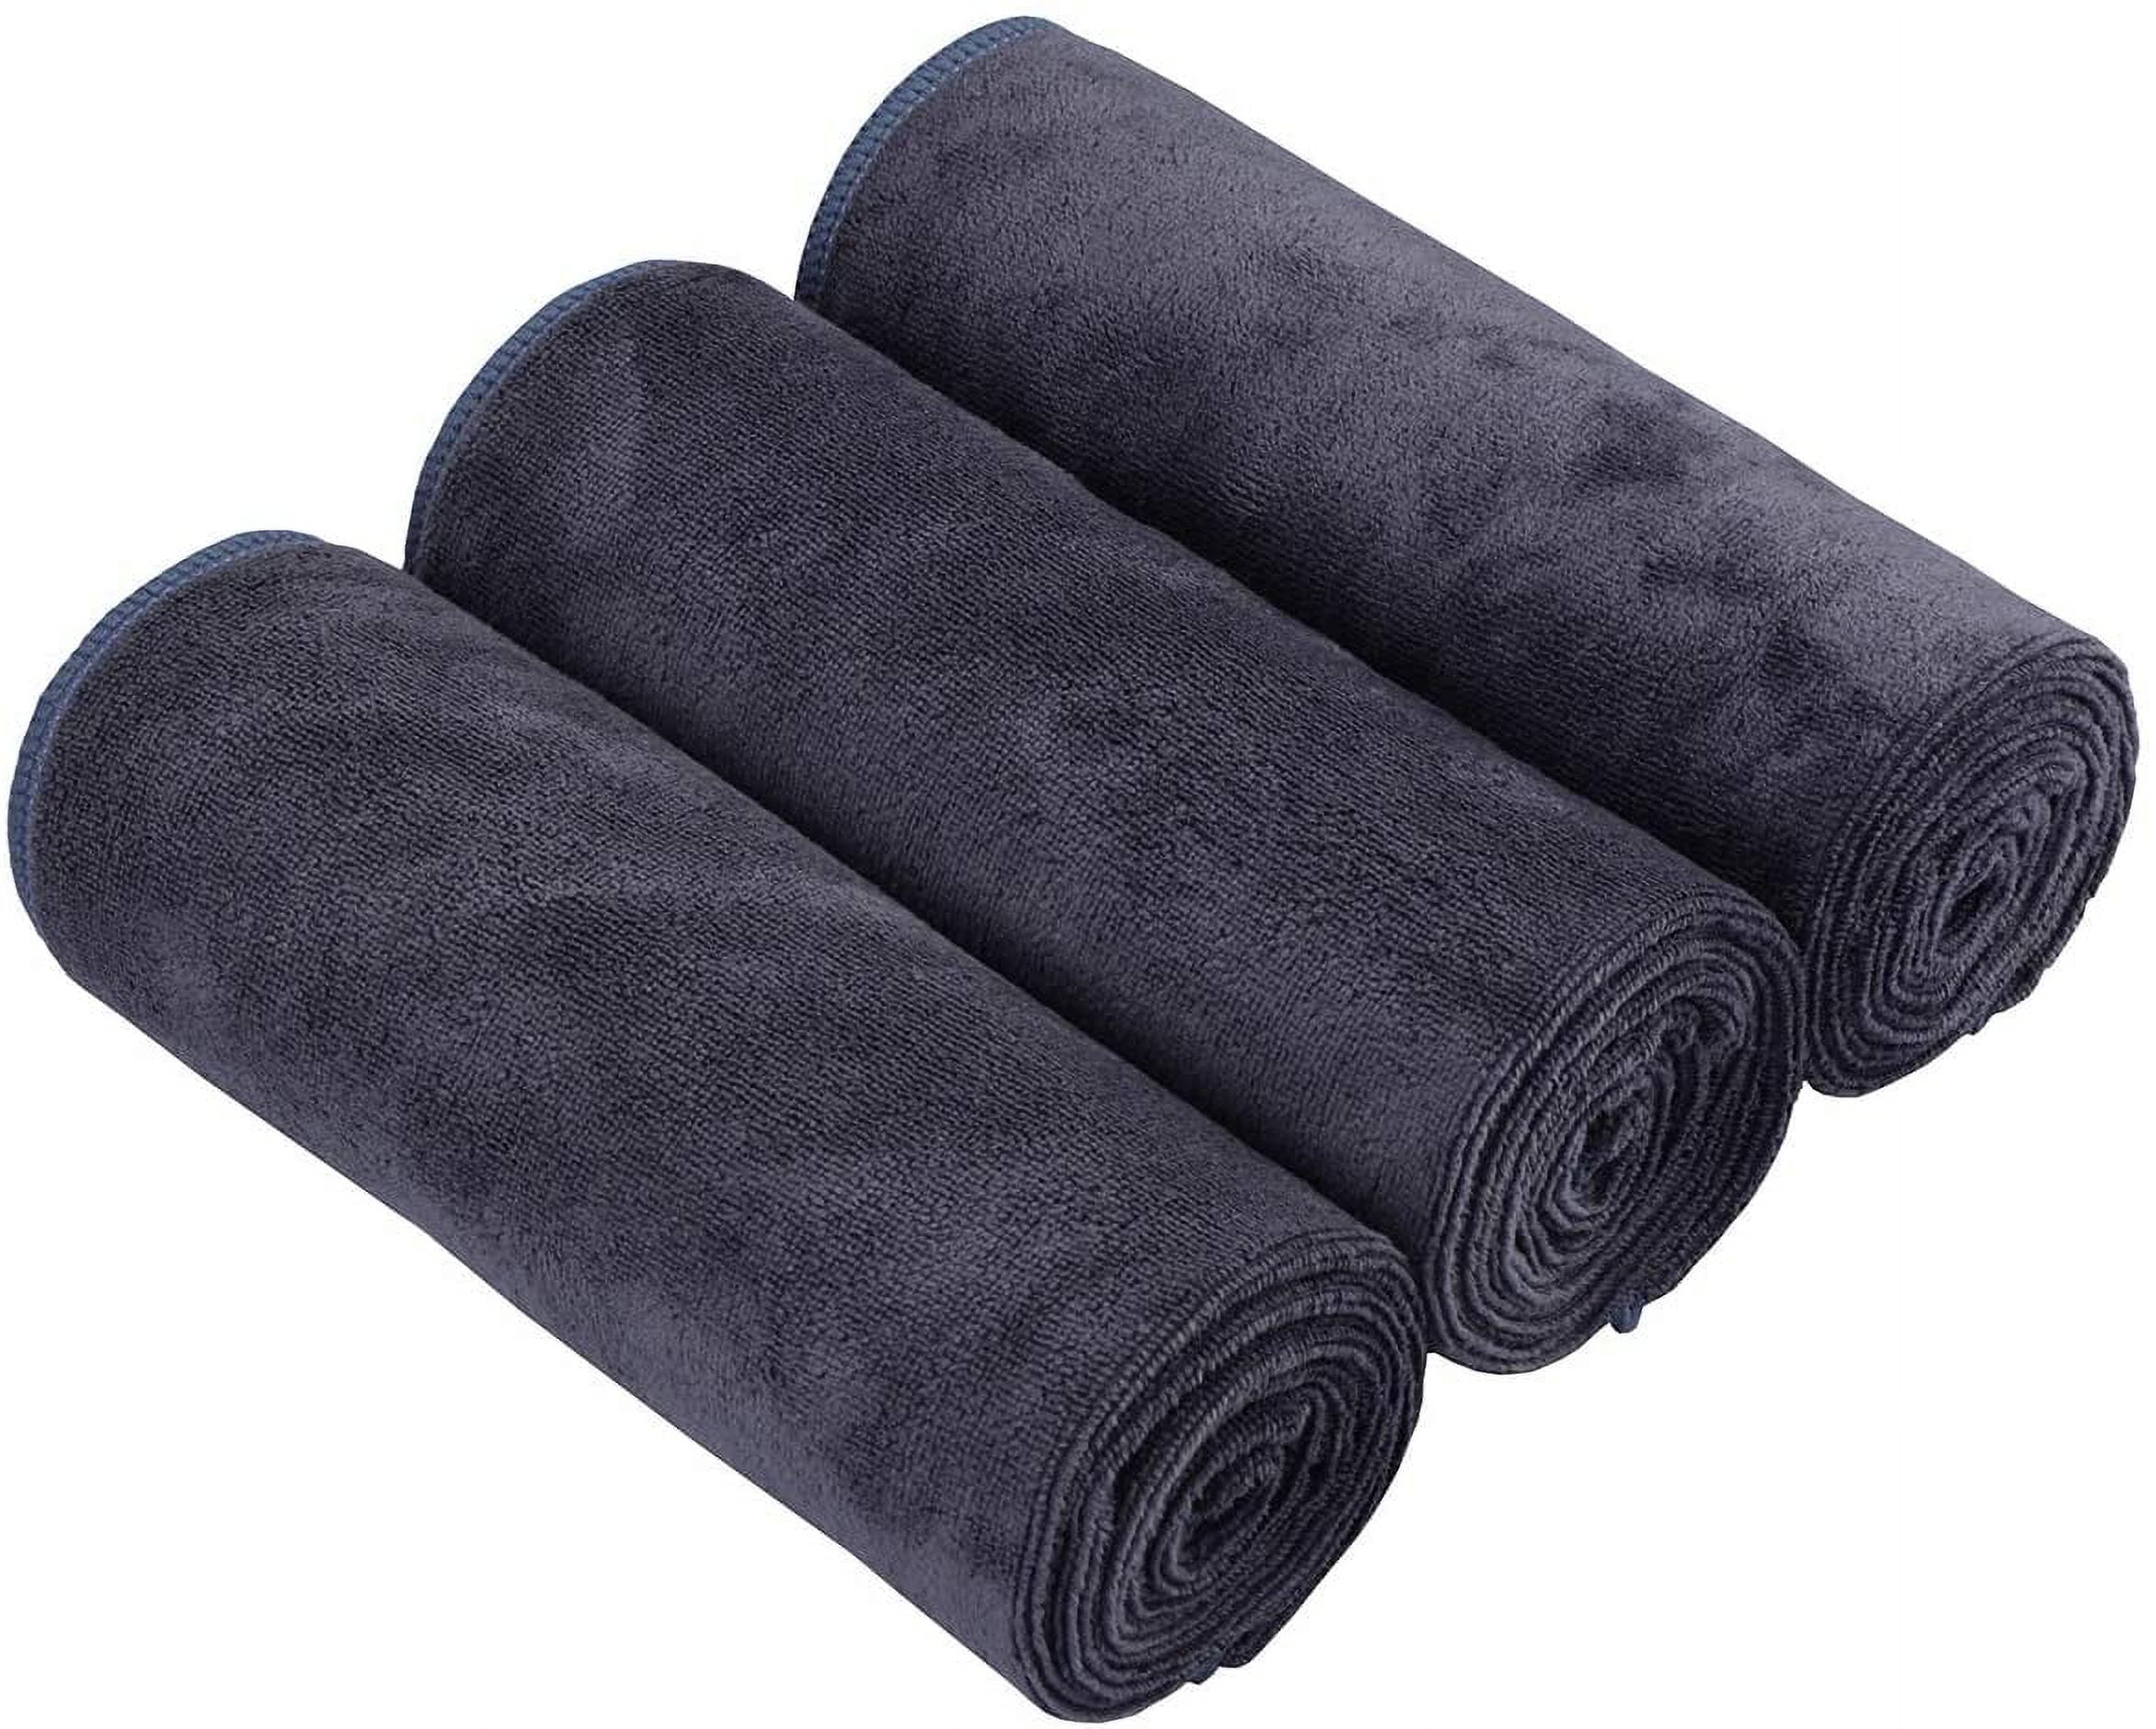 Microfiber Gym Towel - (Pack of 10) Soft Lightweight Quick Dry